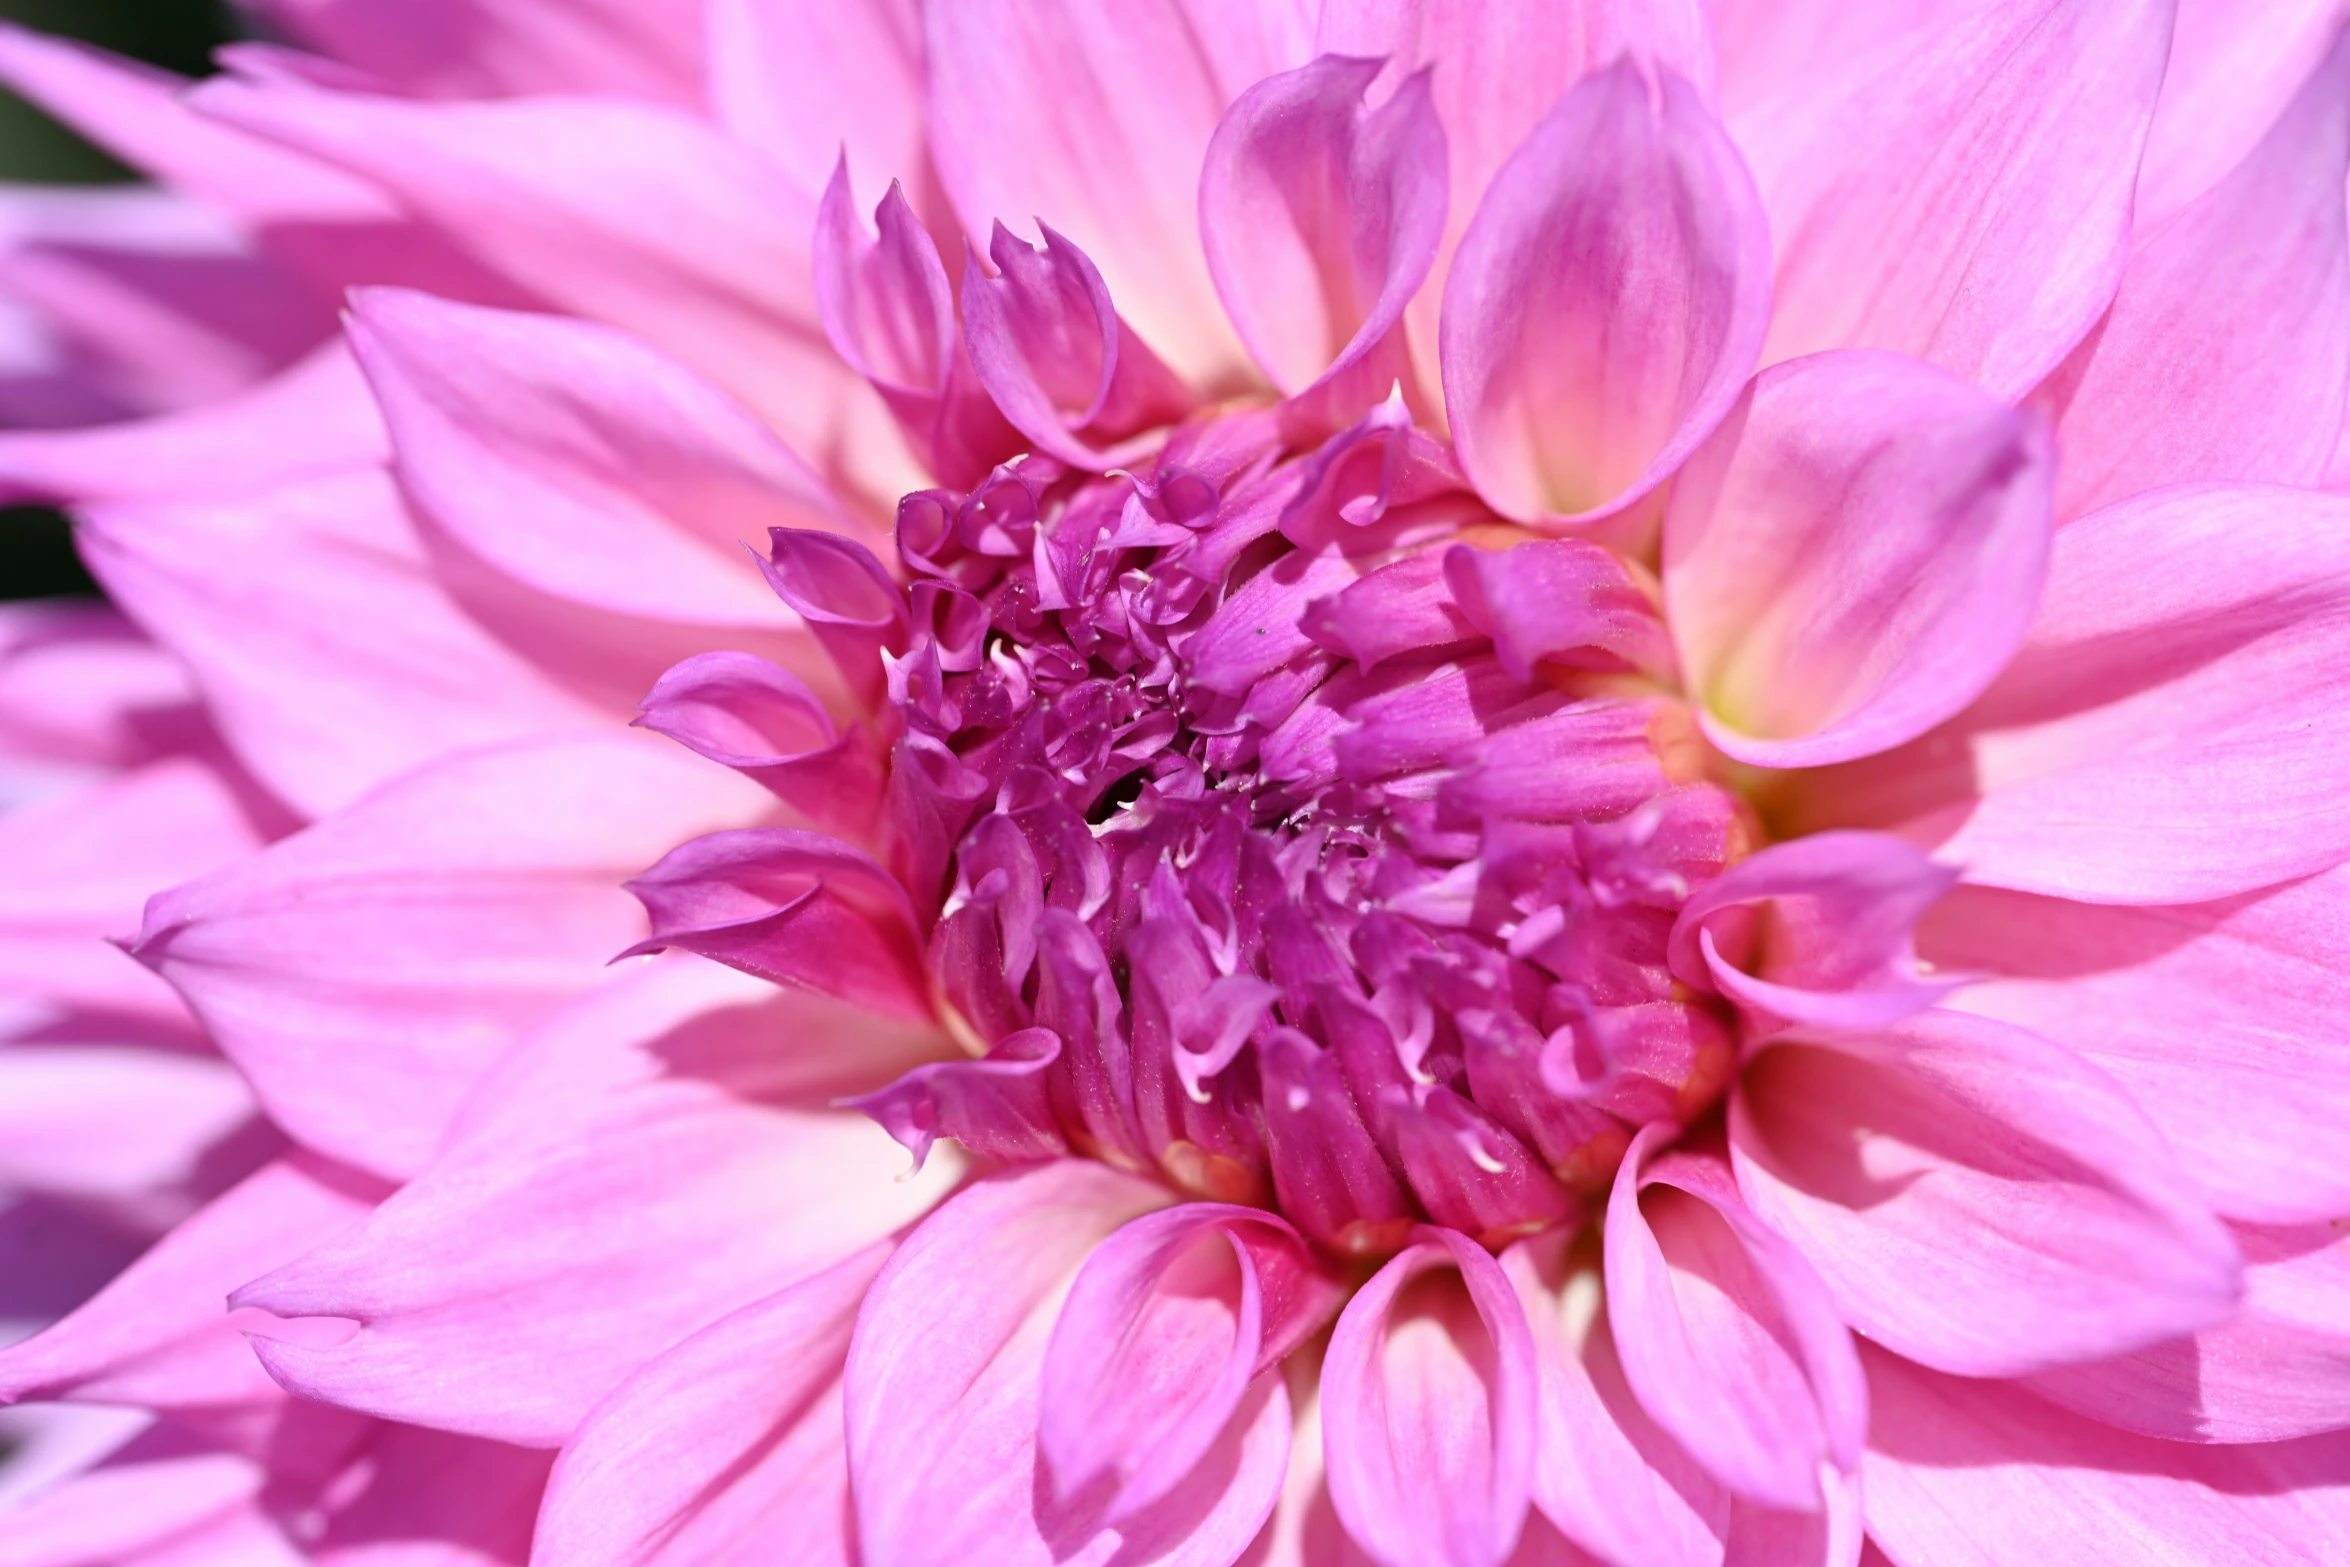 a close - up po of a bright pink flower